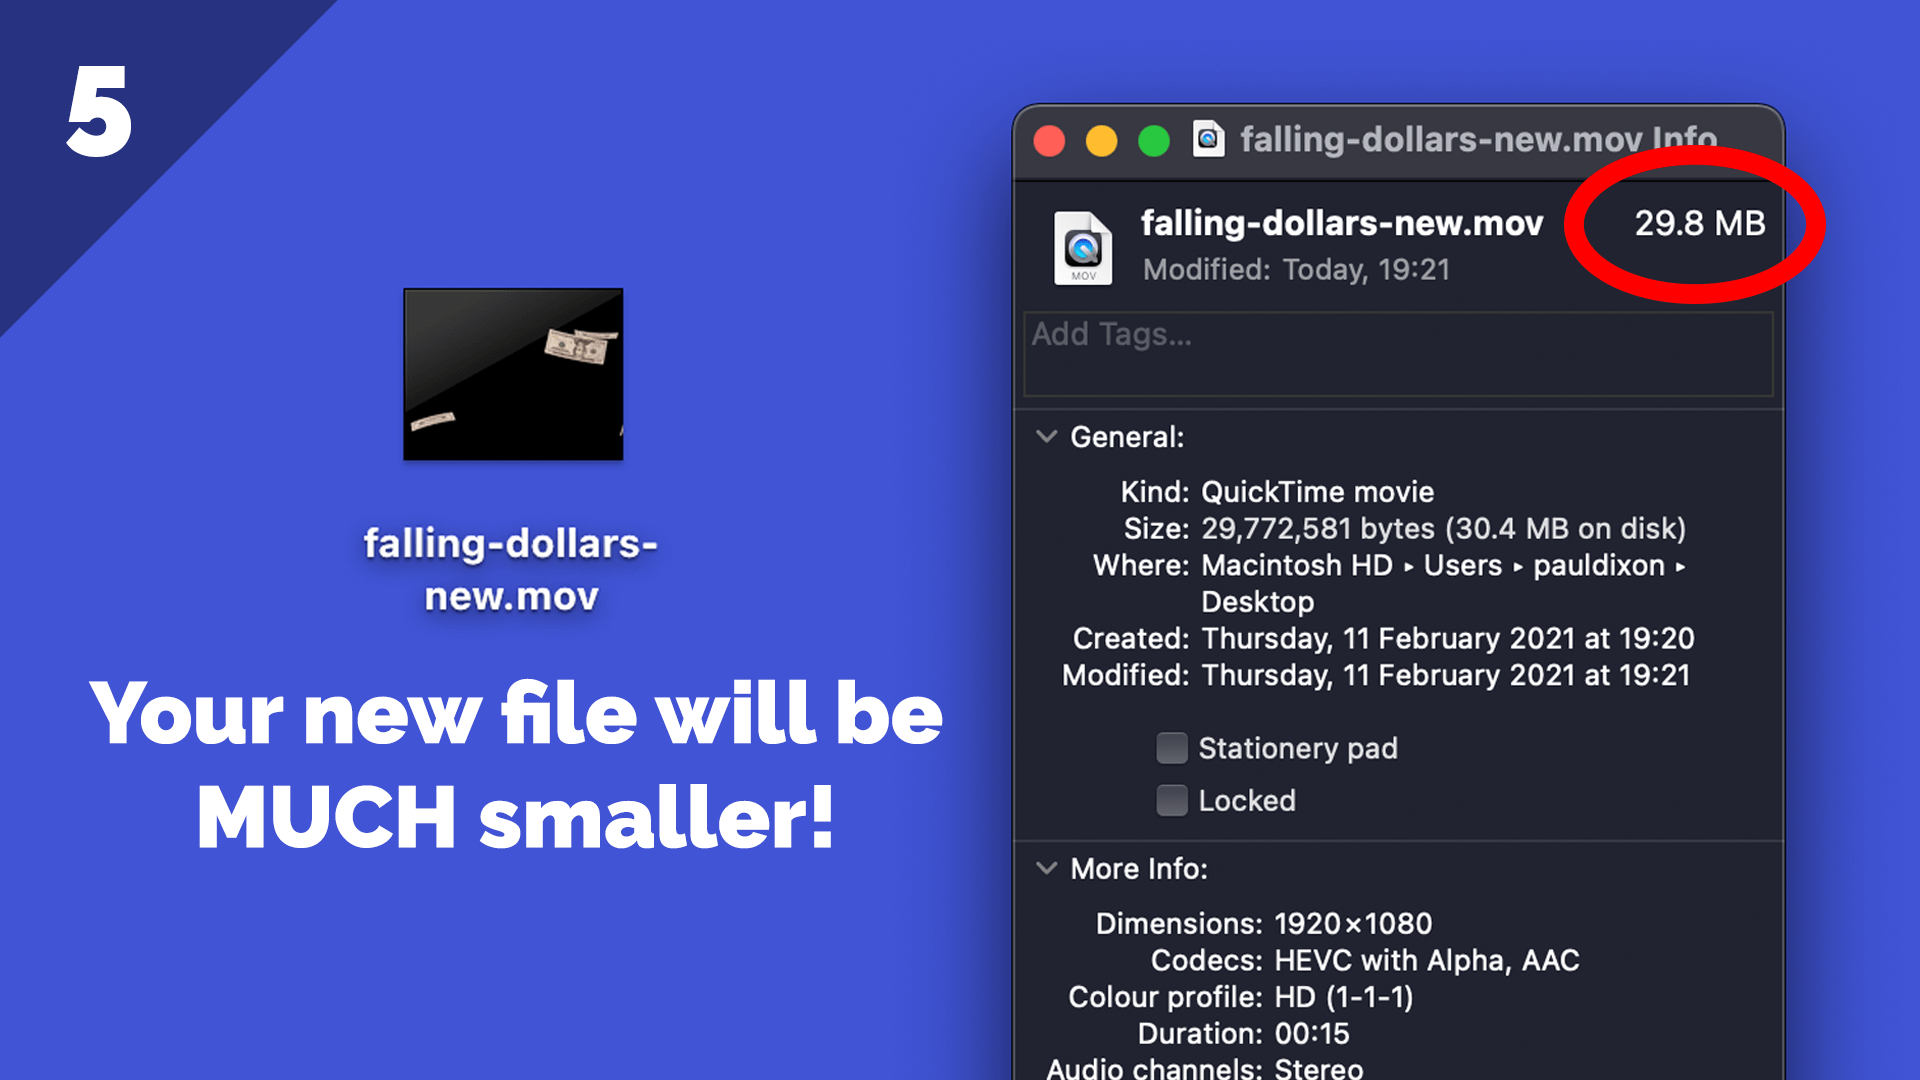 Your new file will be much smaller!